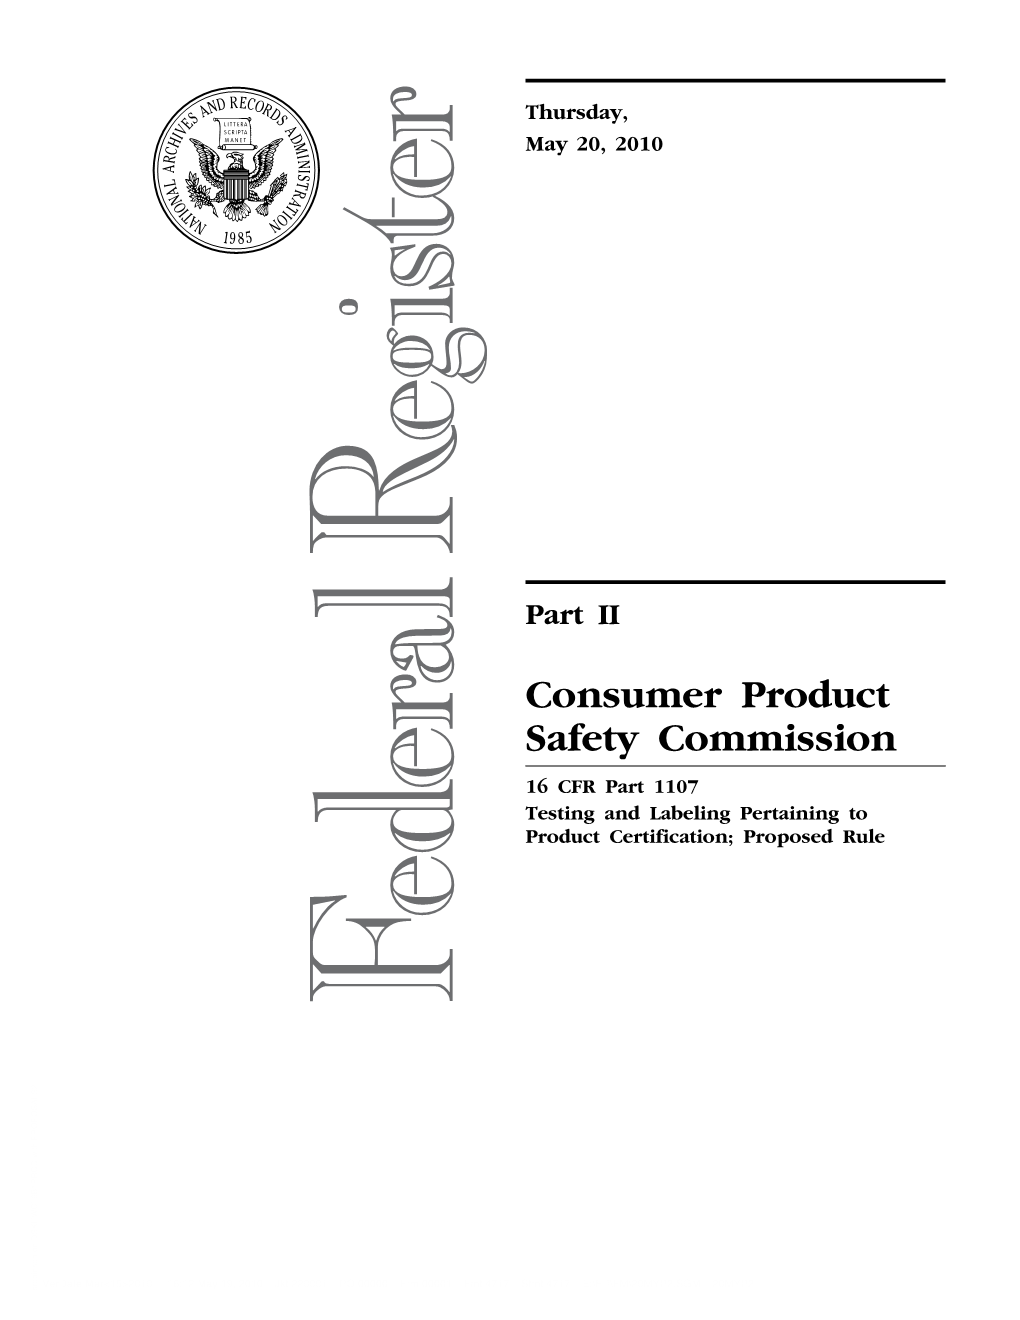 Proposed Rule, 16 CFR Part 1107 – Docket CPSC-2010-0038, May 20